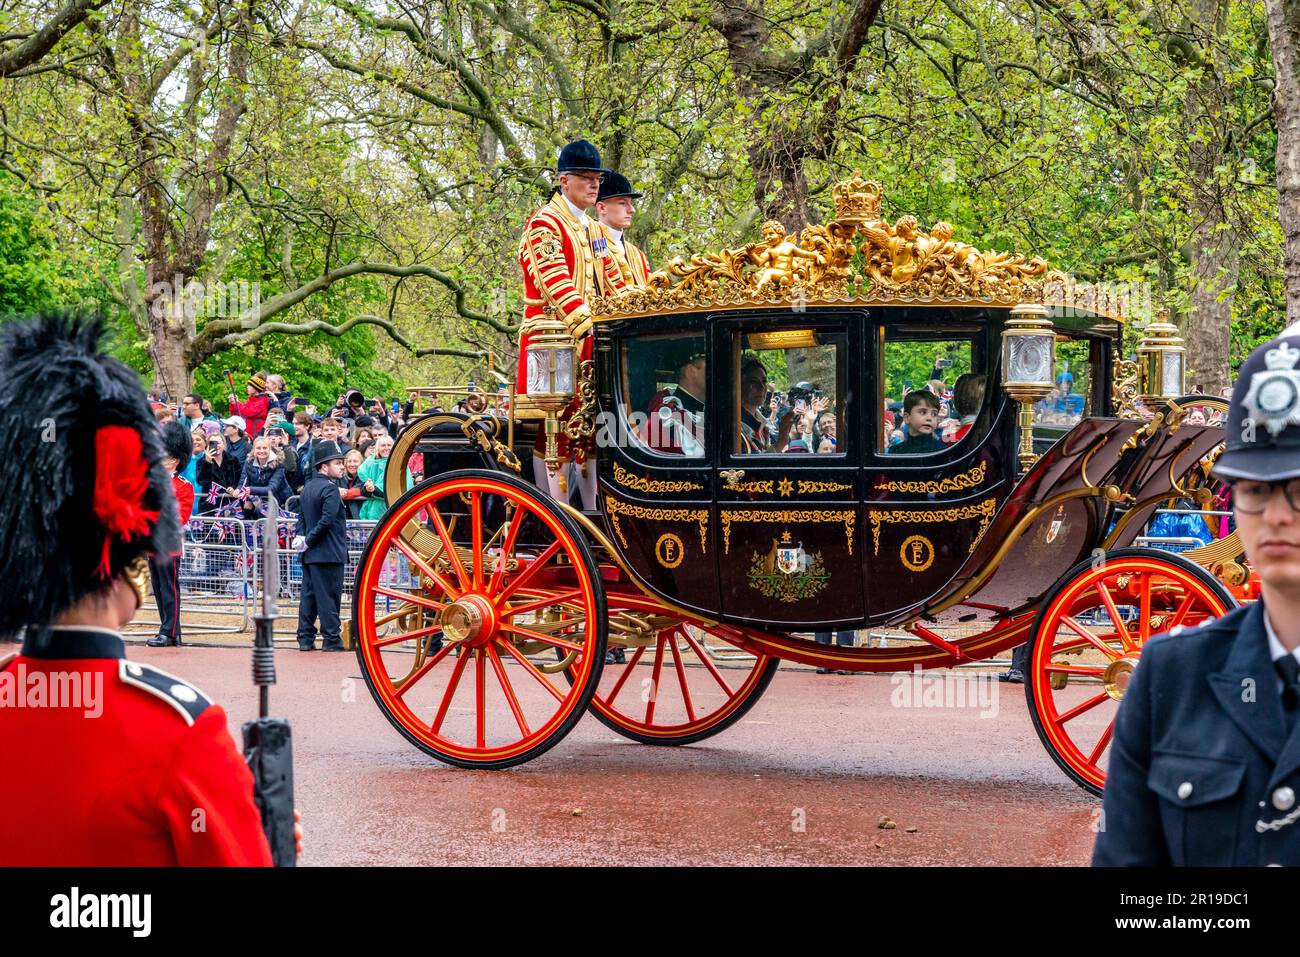 The Prince of Wales and Family Travel Back To Buckingham Palace In The Coronation Procession, The Coronation of King Charles III, London, UK. Stock Photo